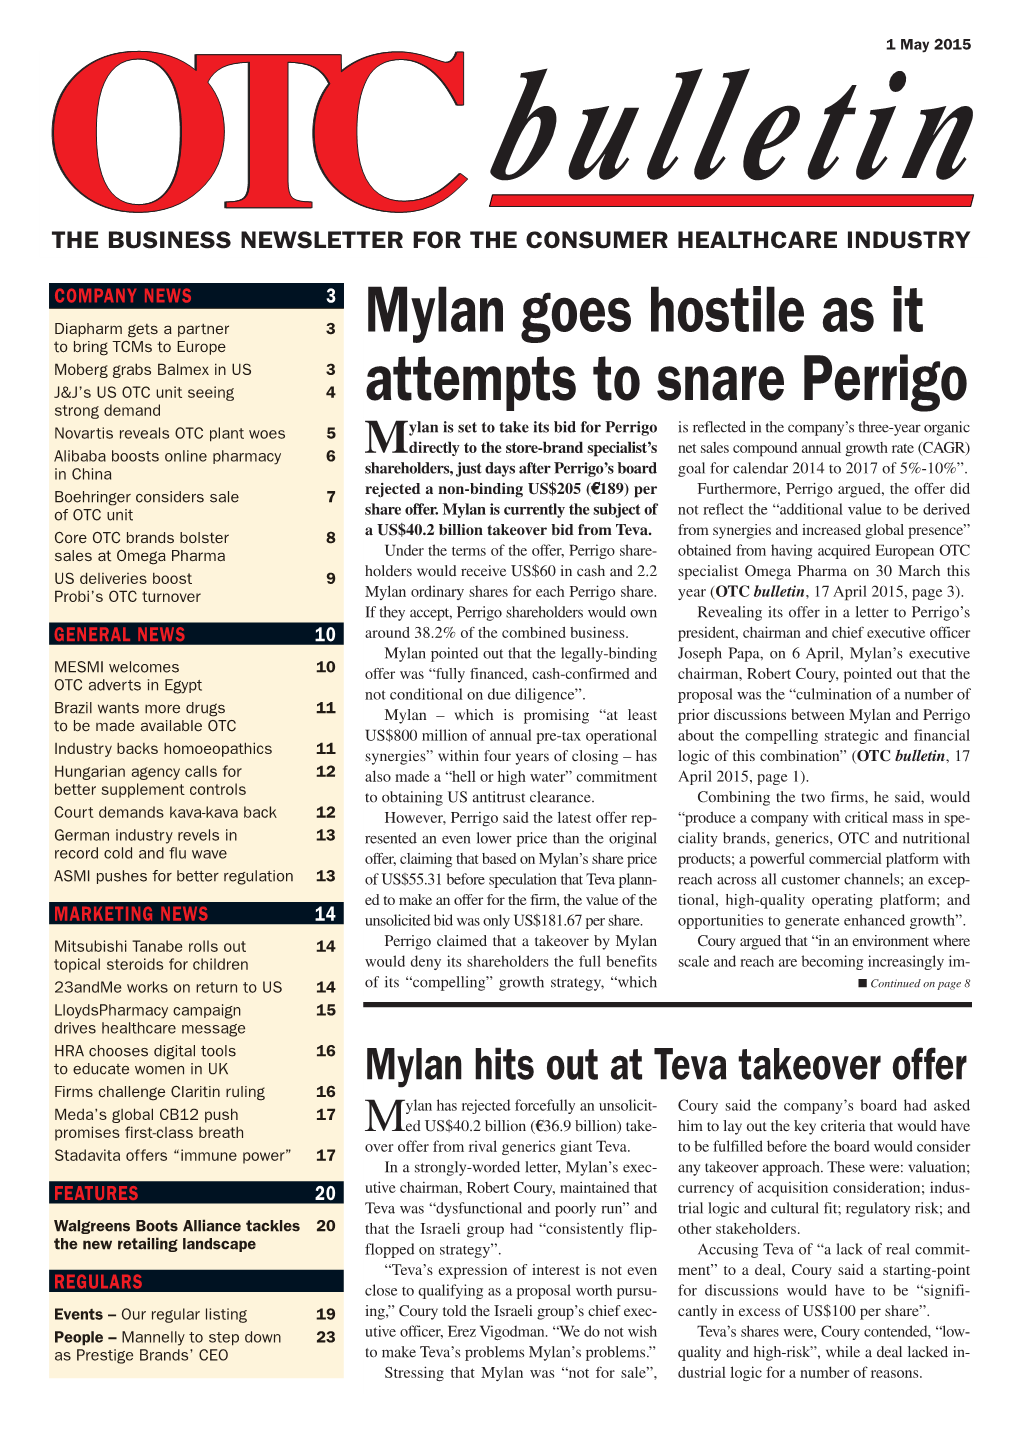 Mylan Goes Hostile As It Attempts to Snare Perrigo